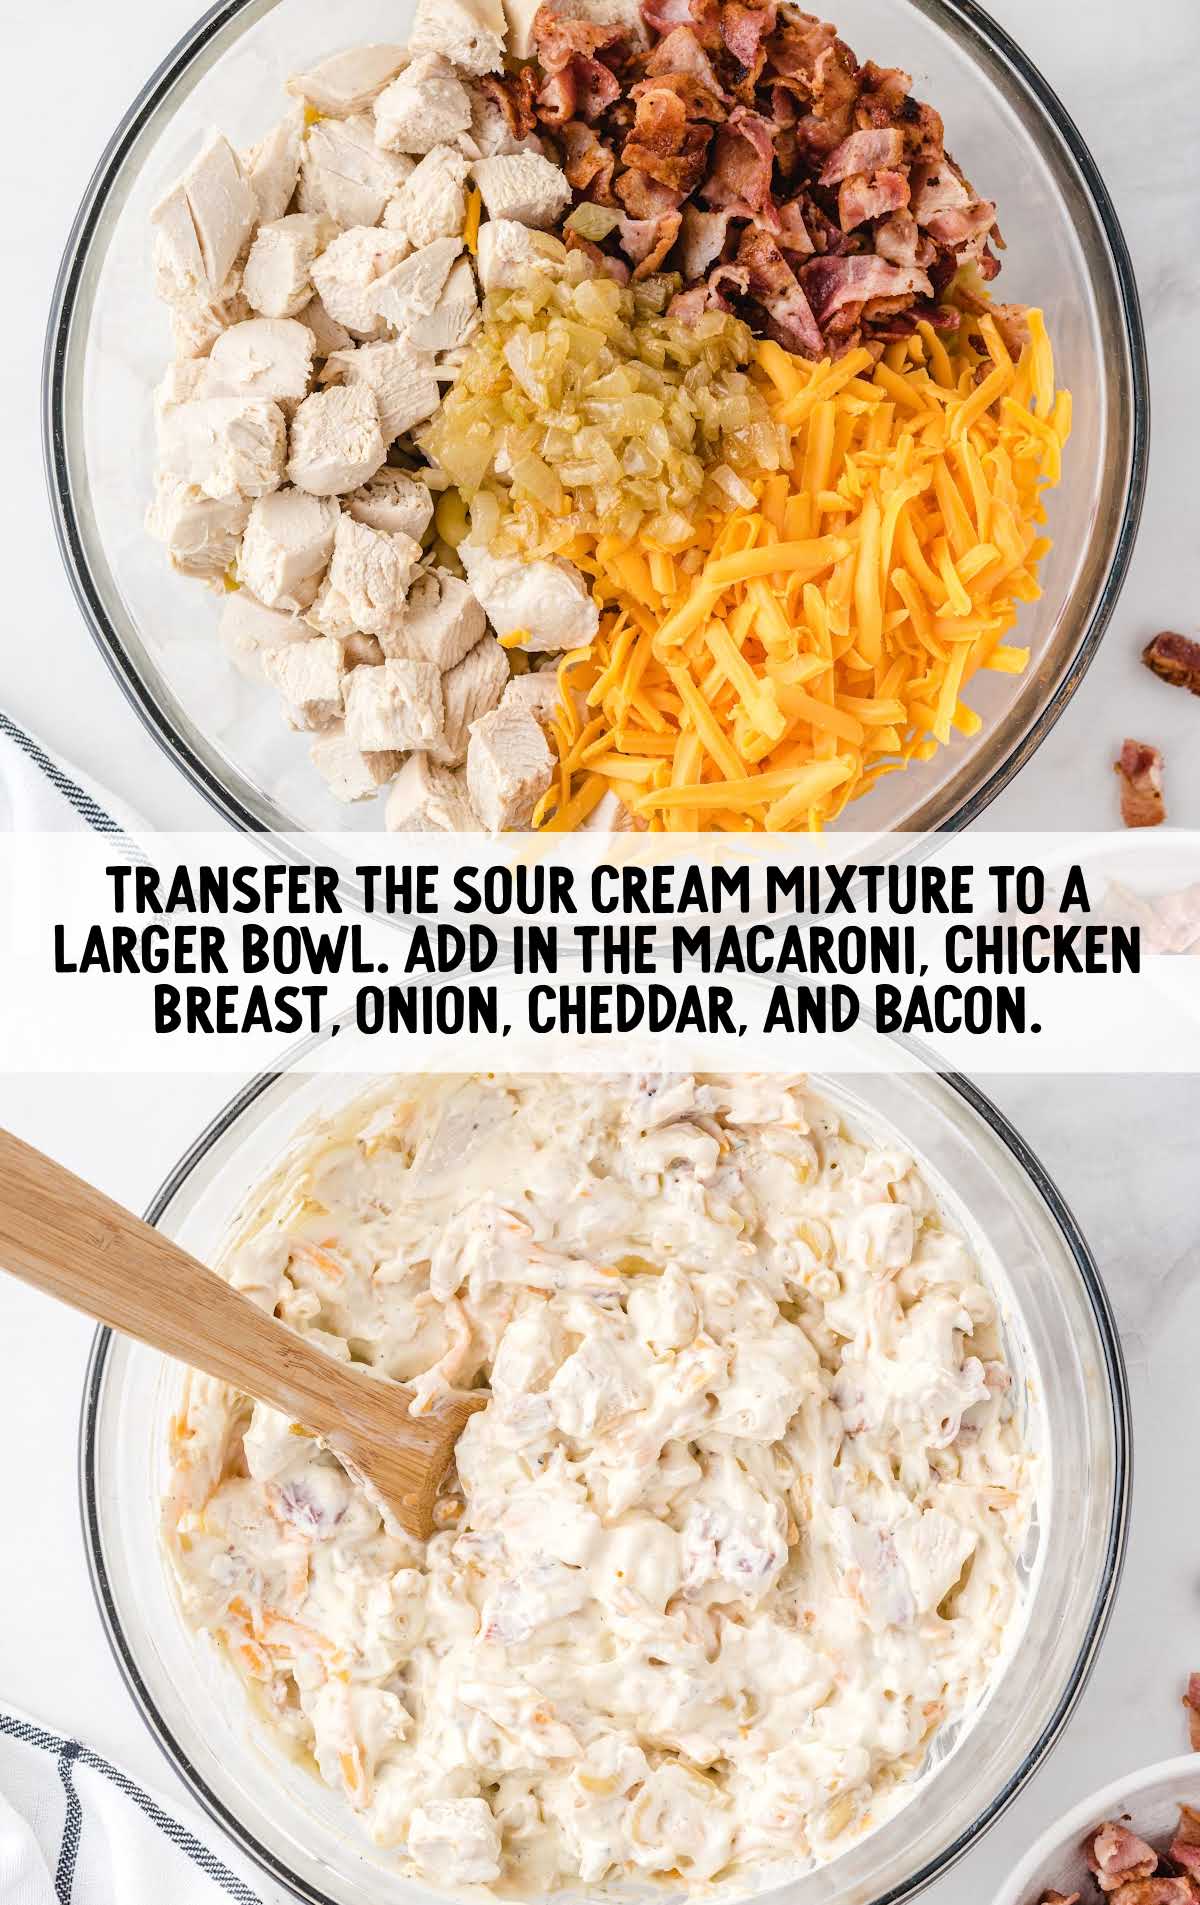 sour cream mixture transferred to another bowl and add macaroni, chicken breast, onion, cheddar, and bacon  